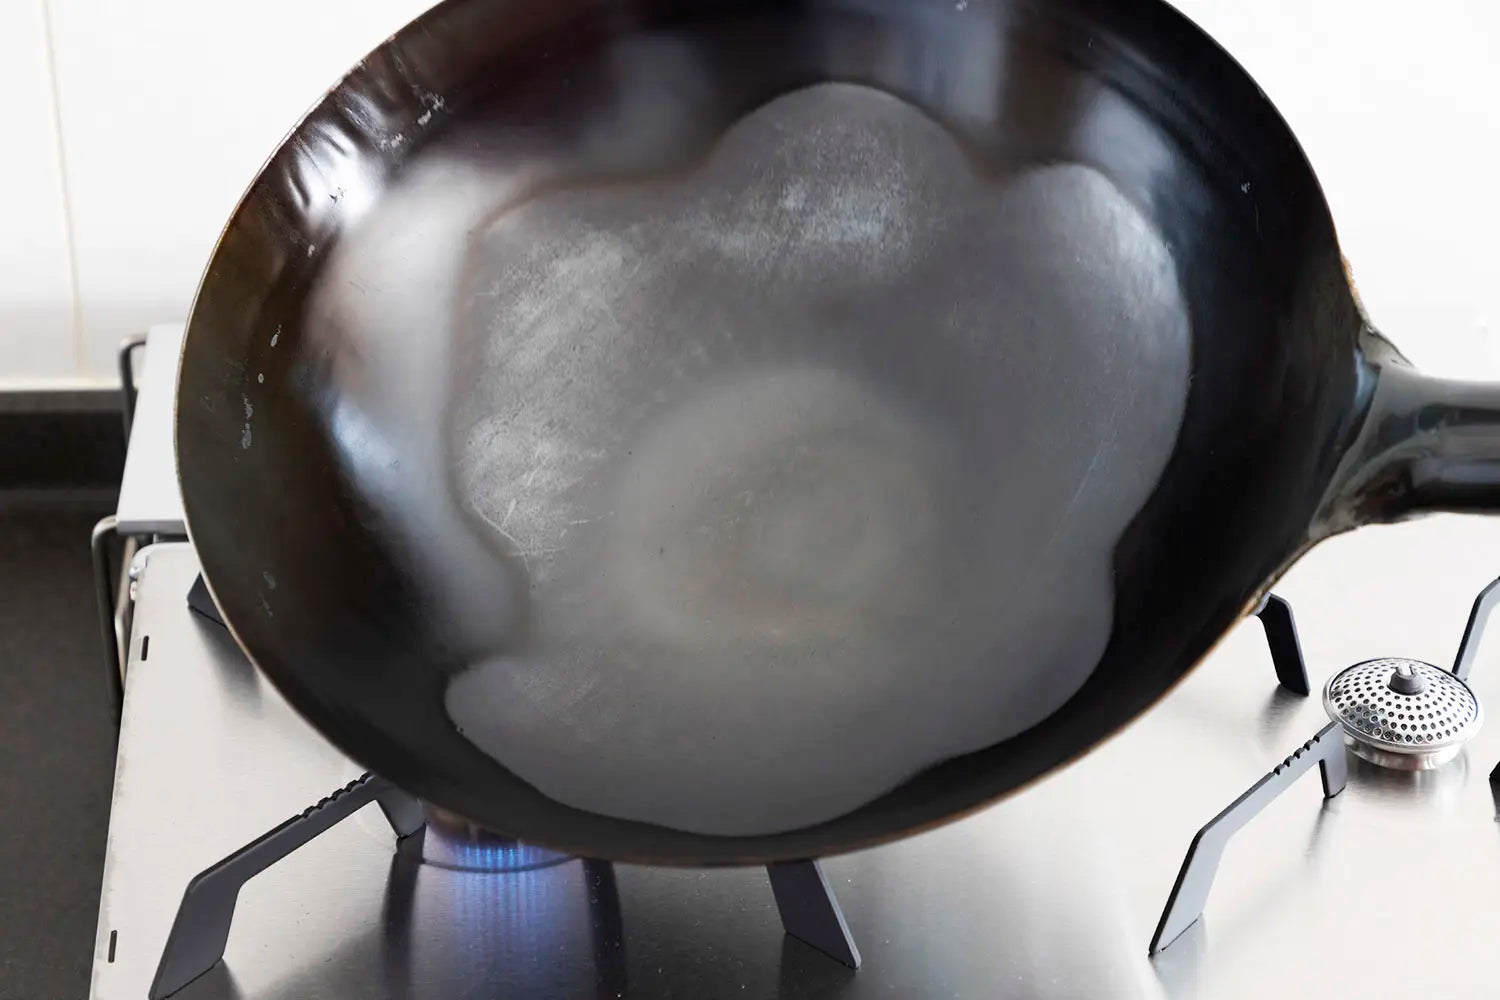 Burning off the anti-rust coating on a new wok